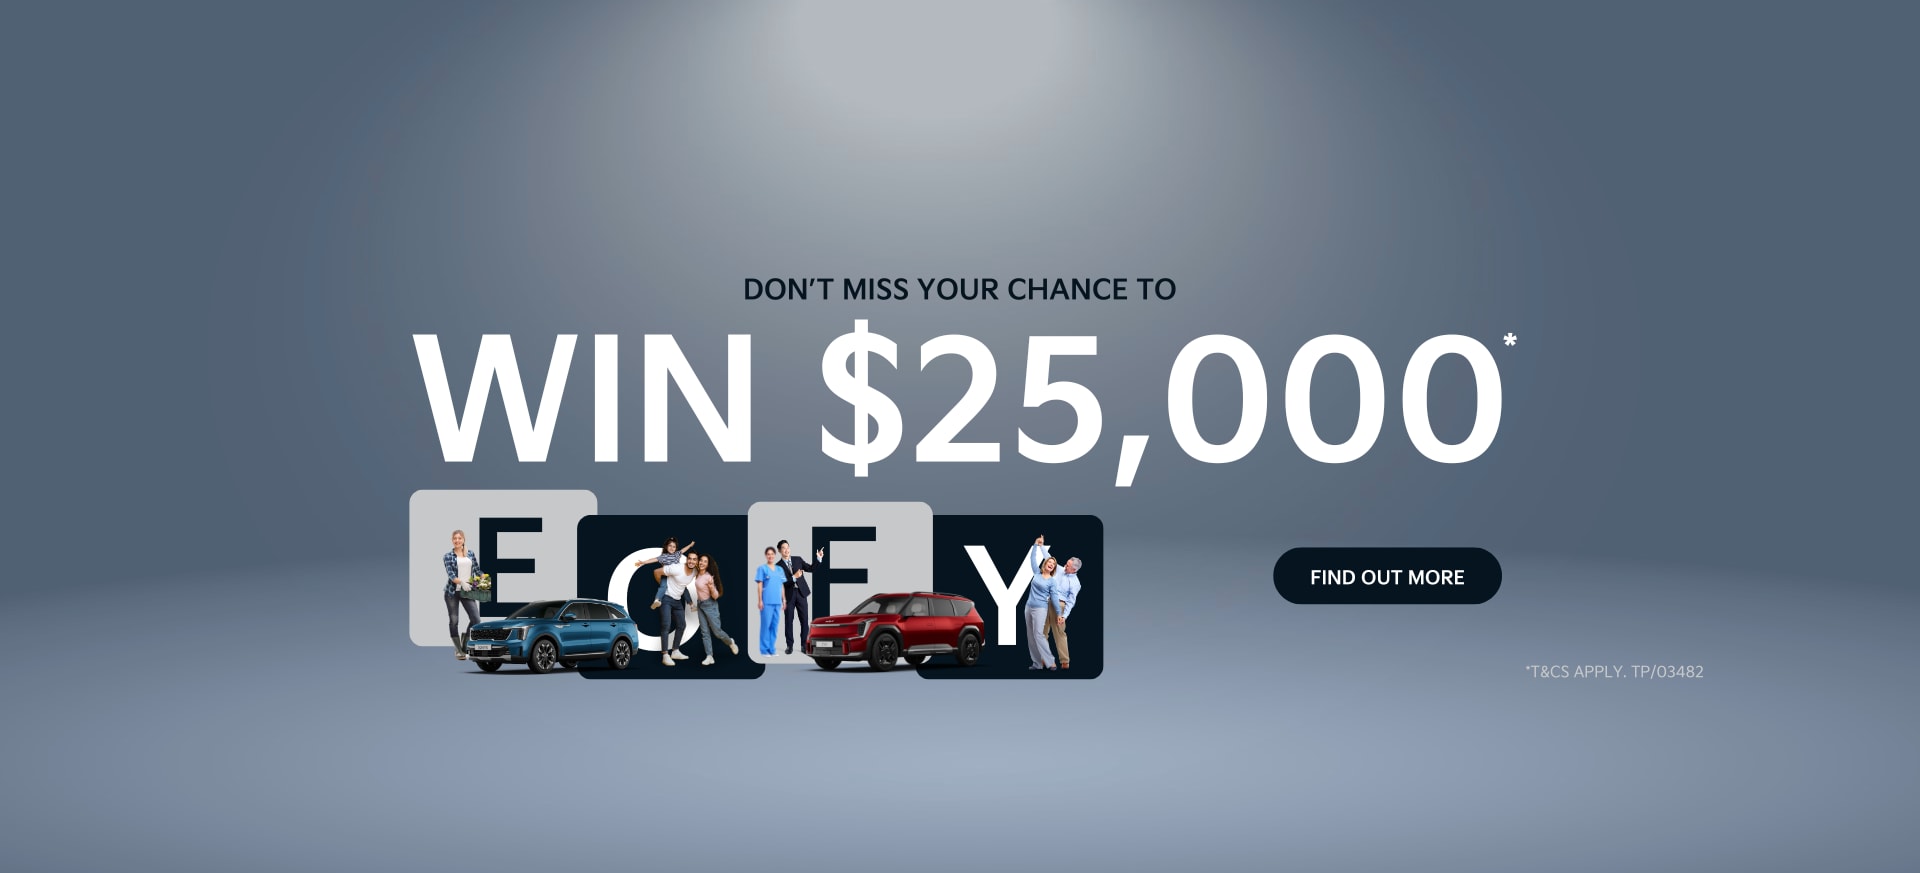 Don't Miss Your Chance to Win $25,000*